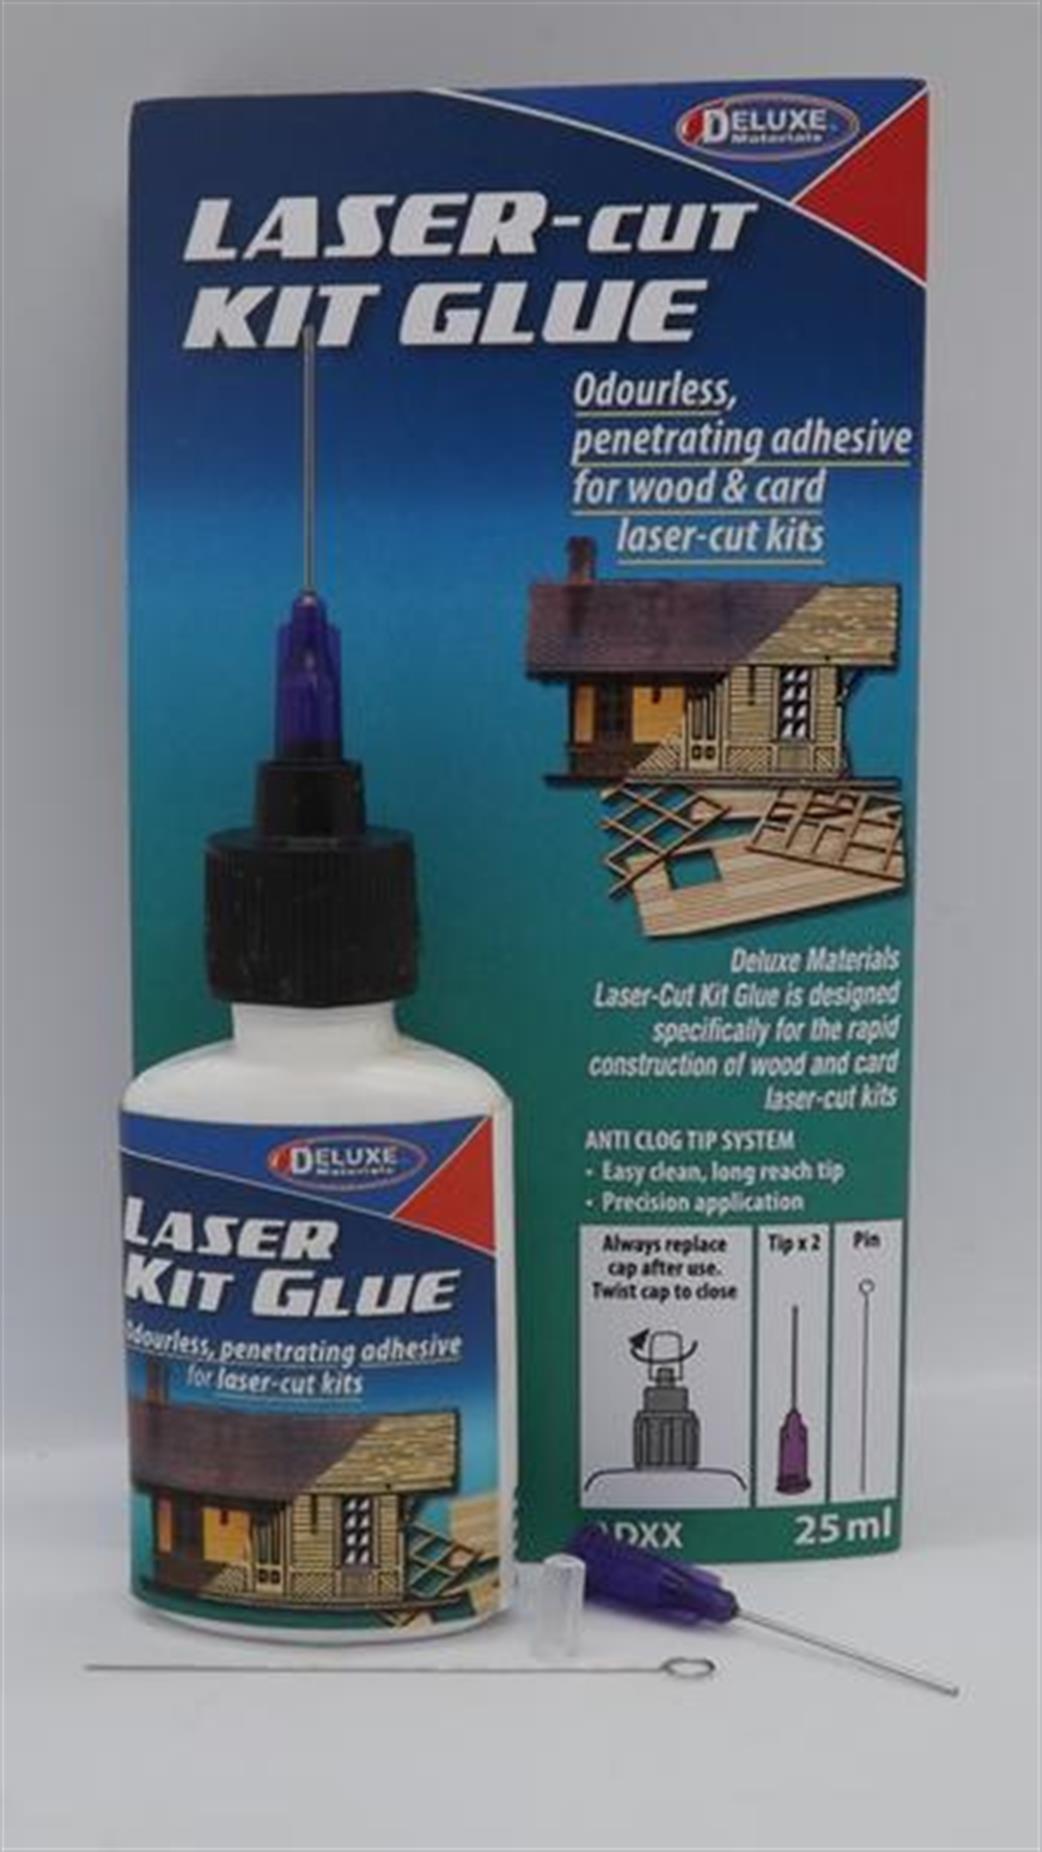 Deluxe Materials  AD87 Laser-cut Kit Glue 25g